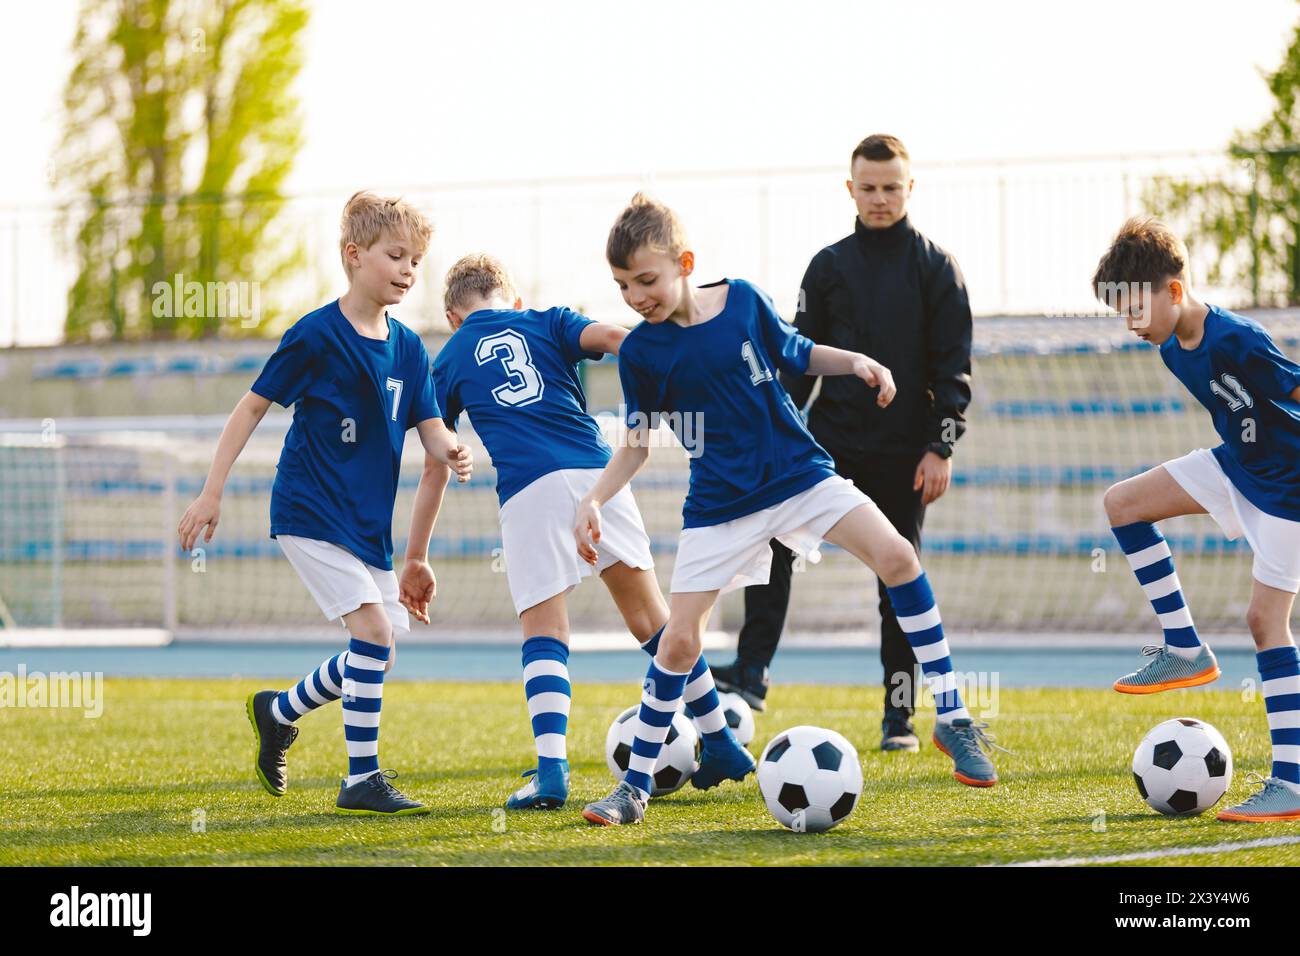 Children Training Football. Young Boys Running with Ball on Training Practice Session. Happy Boys Playing Sports and Having Fun Outdoor Stock Photo